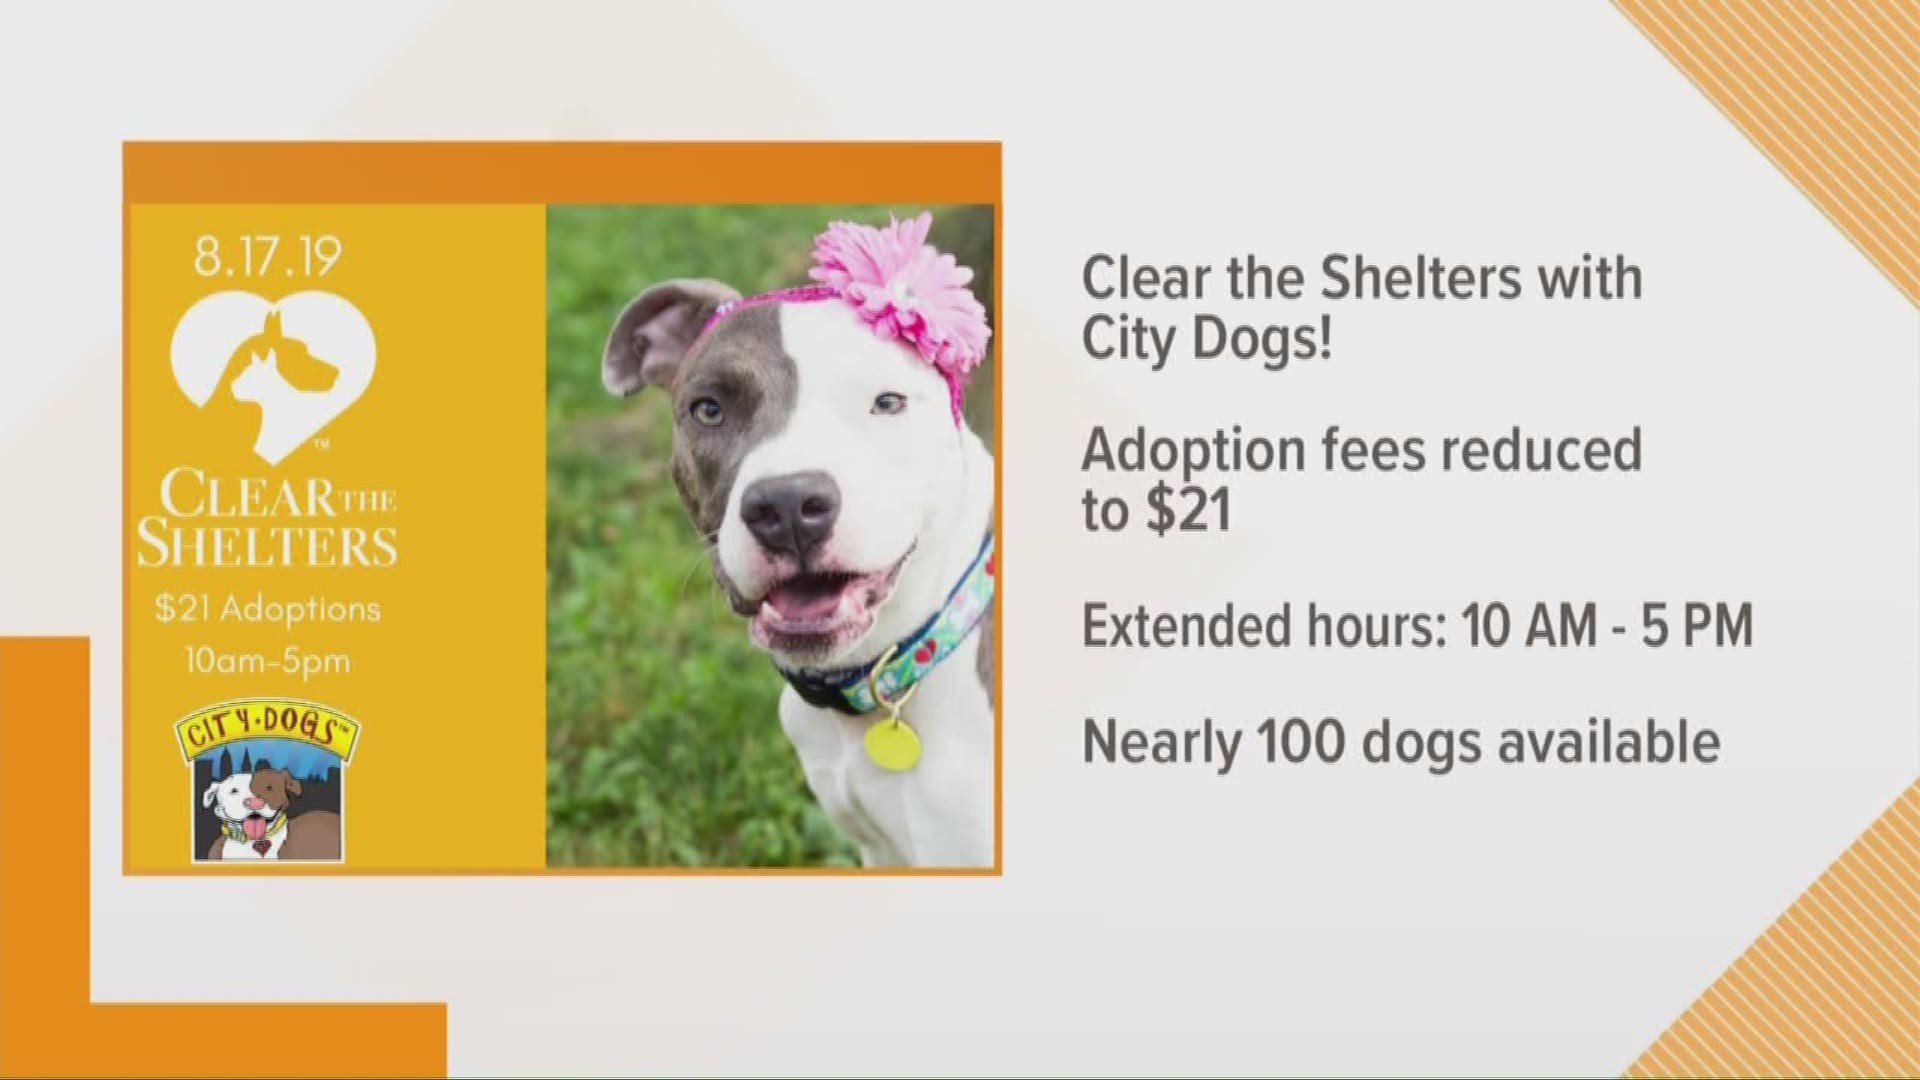 Clear the Shelters is happening this weekend